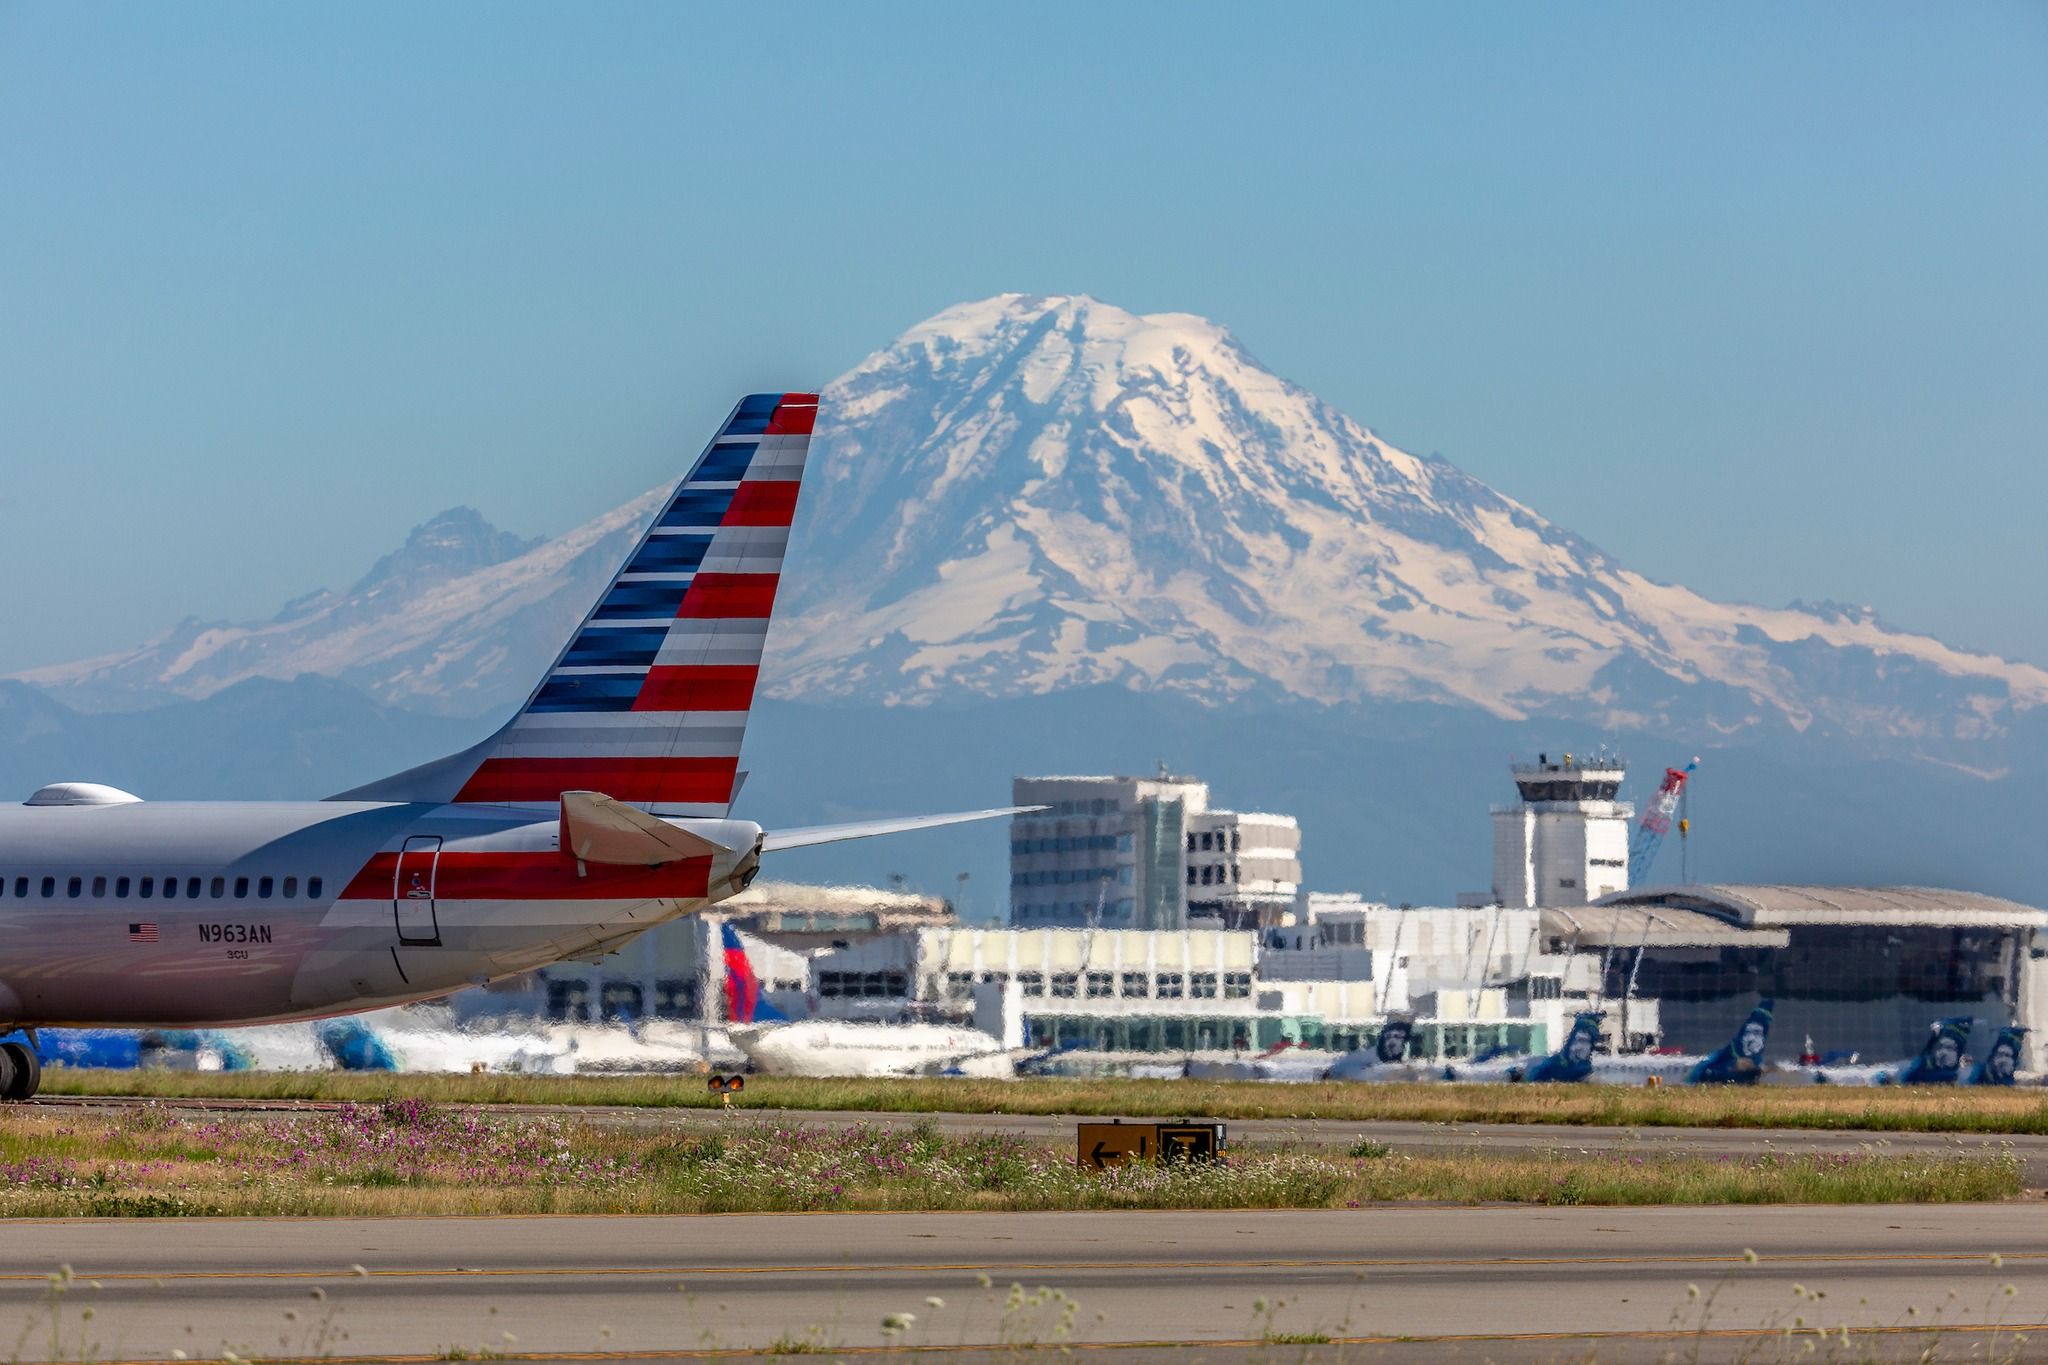 Seattle-Tacoma International Airport with Mt. Liner in the background.